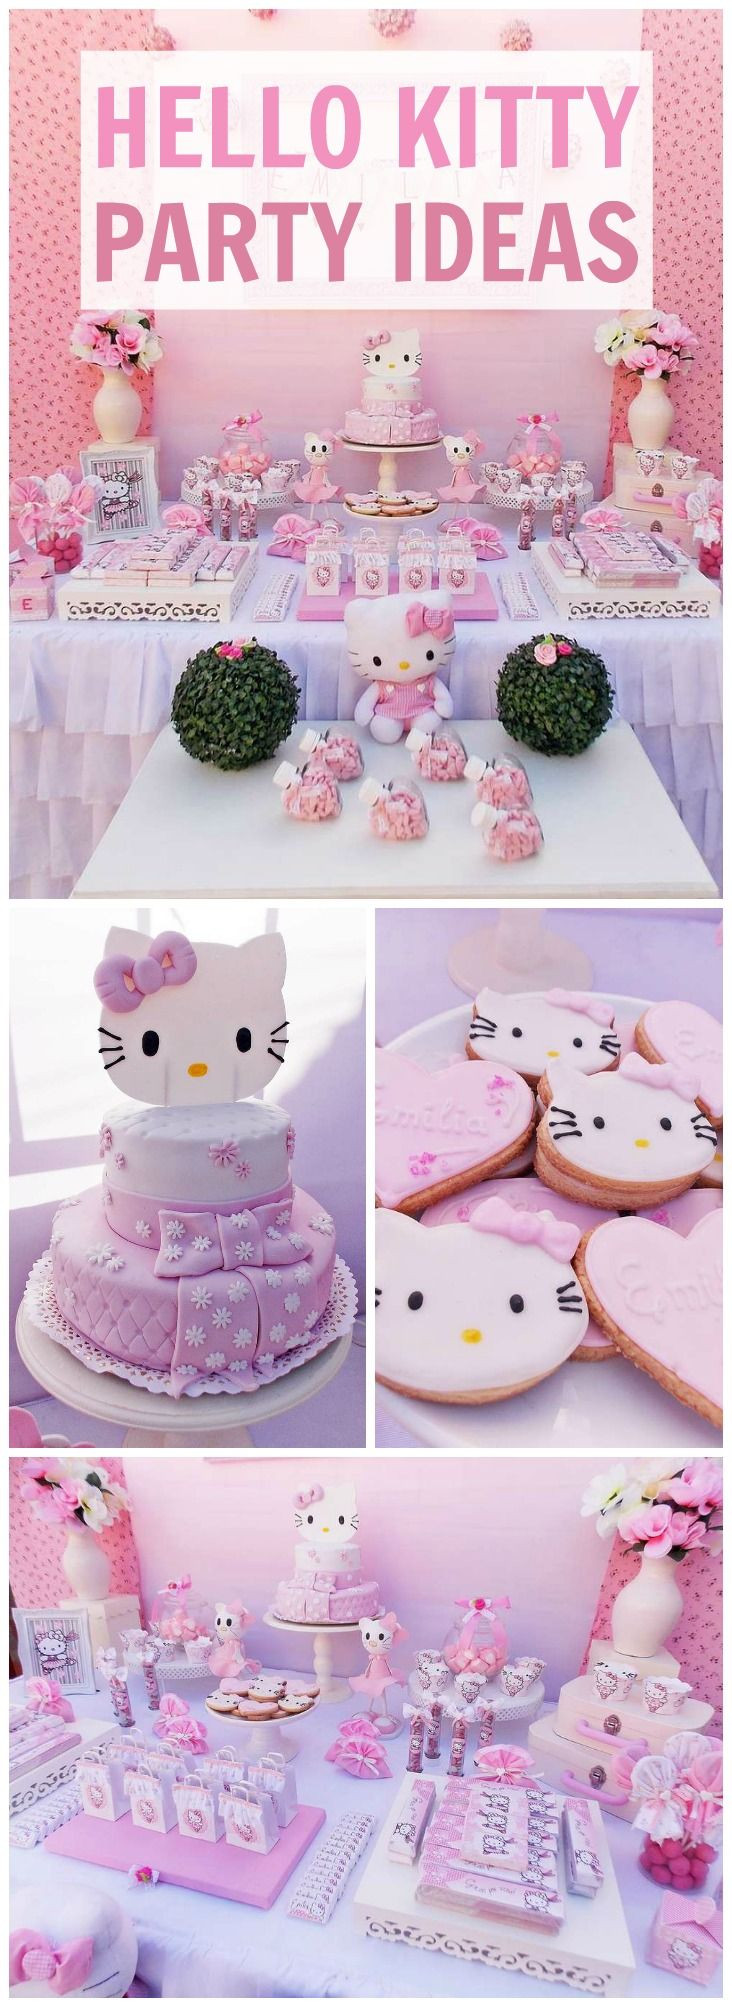 Hello Kitty Birthday Party Decorations
 250 best images about Hello Kitty Party Ideas on Pinterest